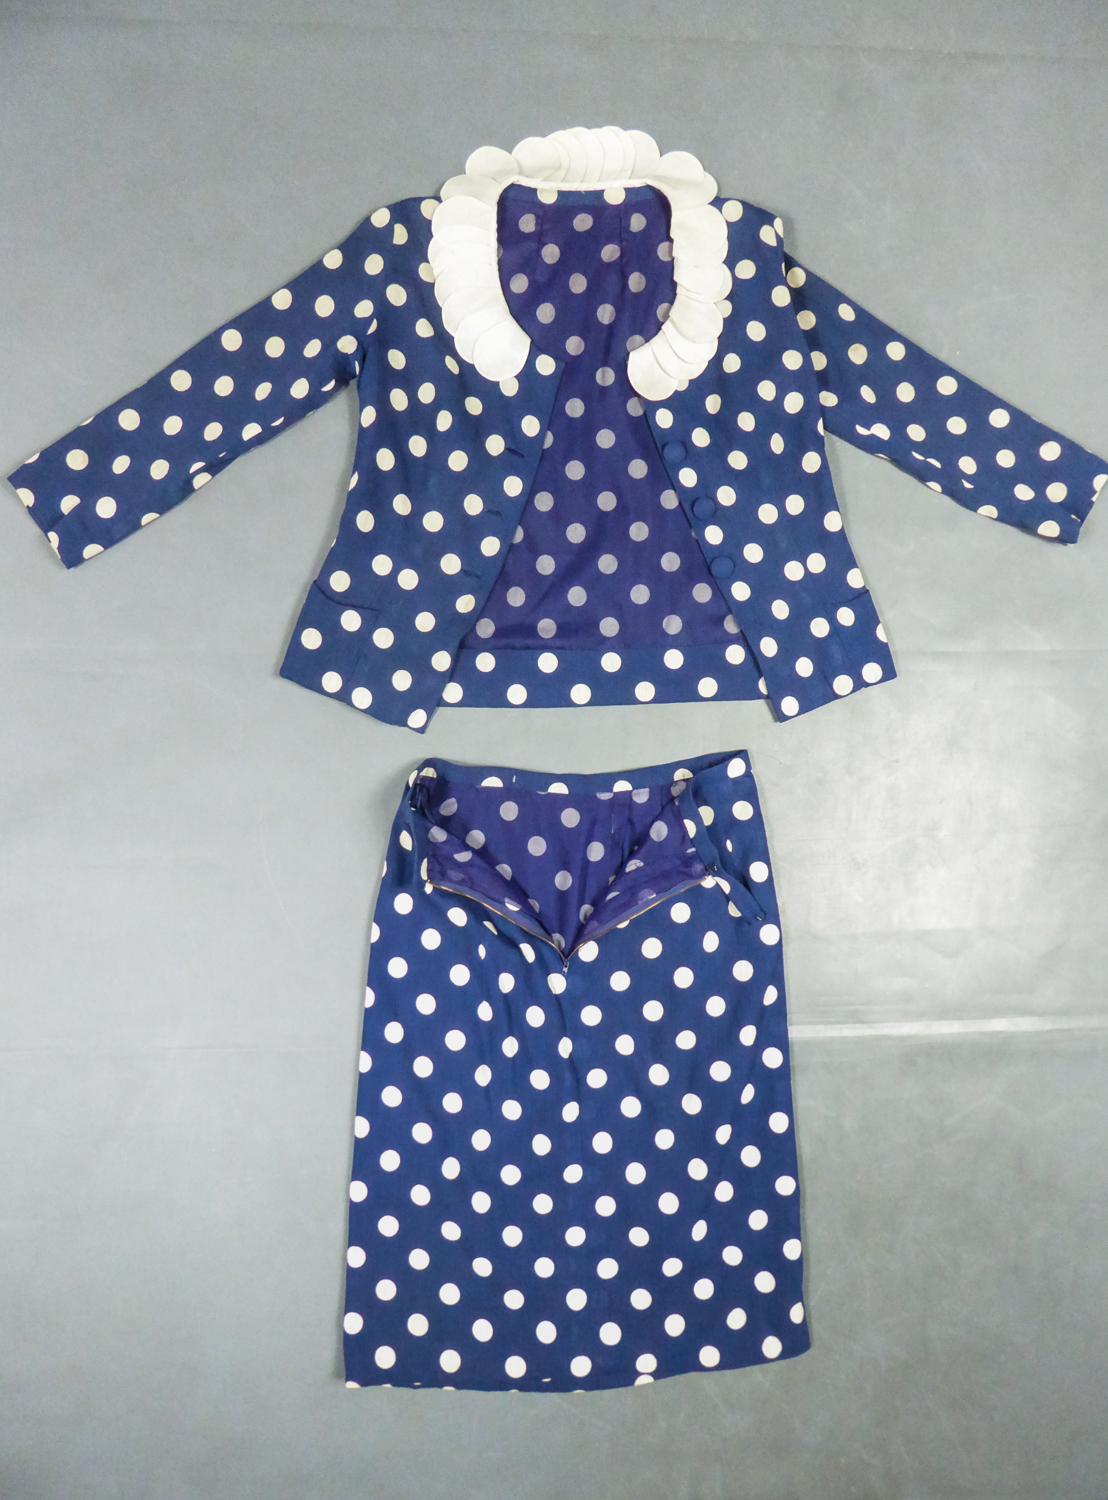 Circa 1960/1970
France

Elegant skirt suit in navy blue printed silk crepe with white polka dots signed by Y. Dubois in Nice from the 1960s. Two-piece summer set, with long-sleeved blouse, round Peter Pan collar with white organza flower petals,